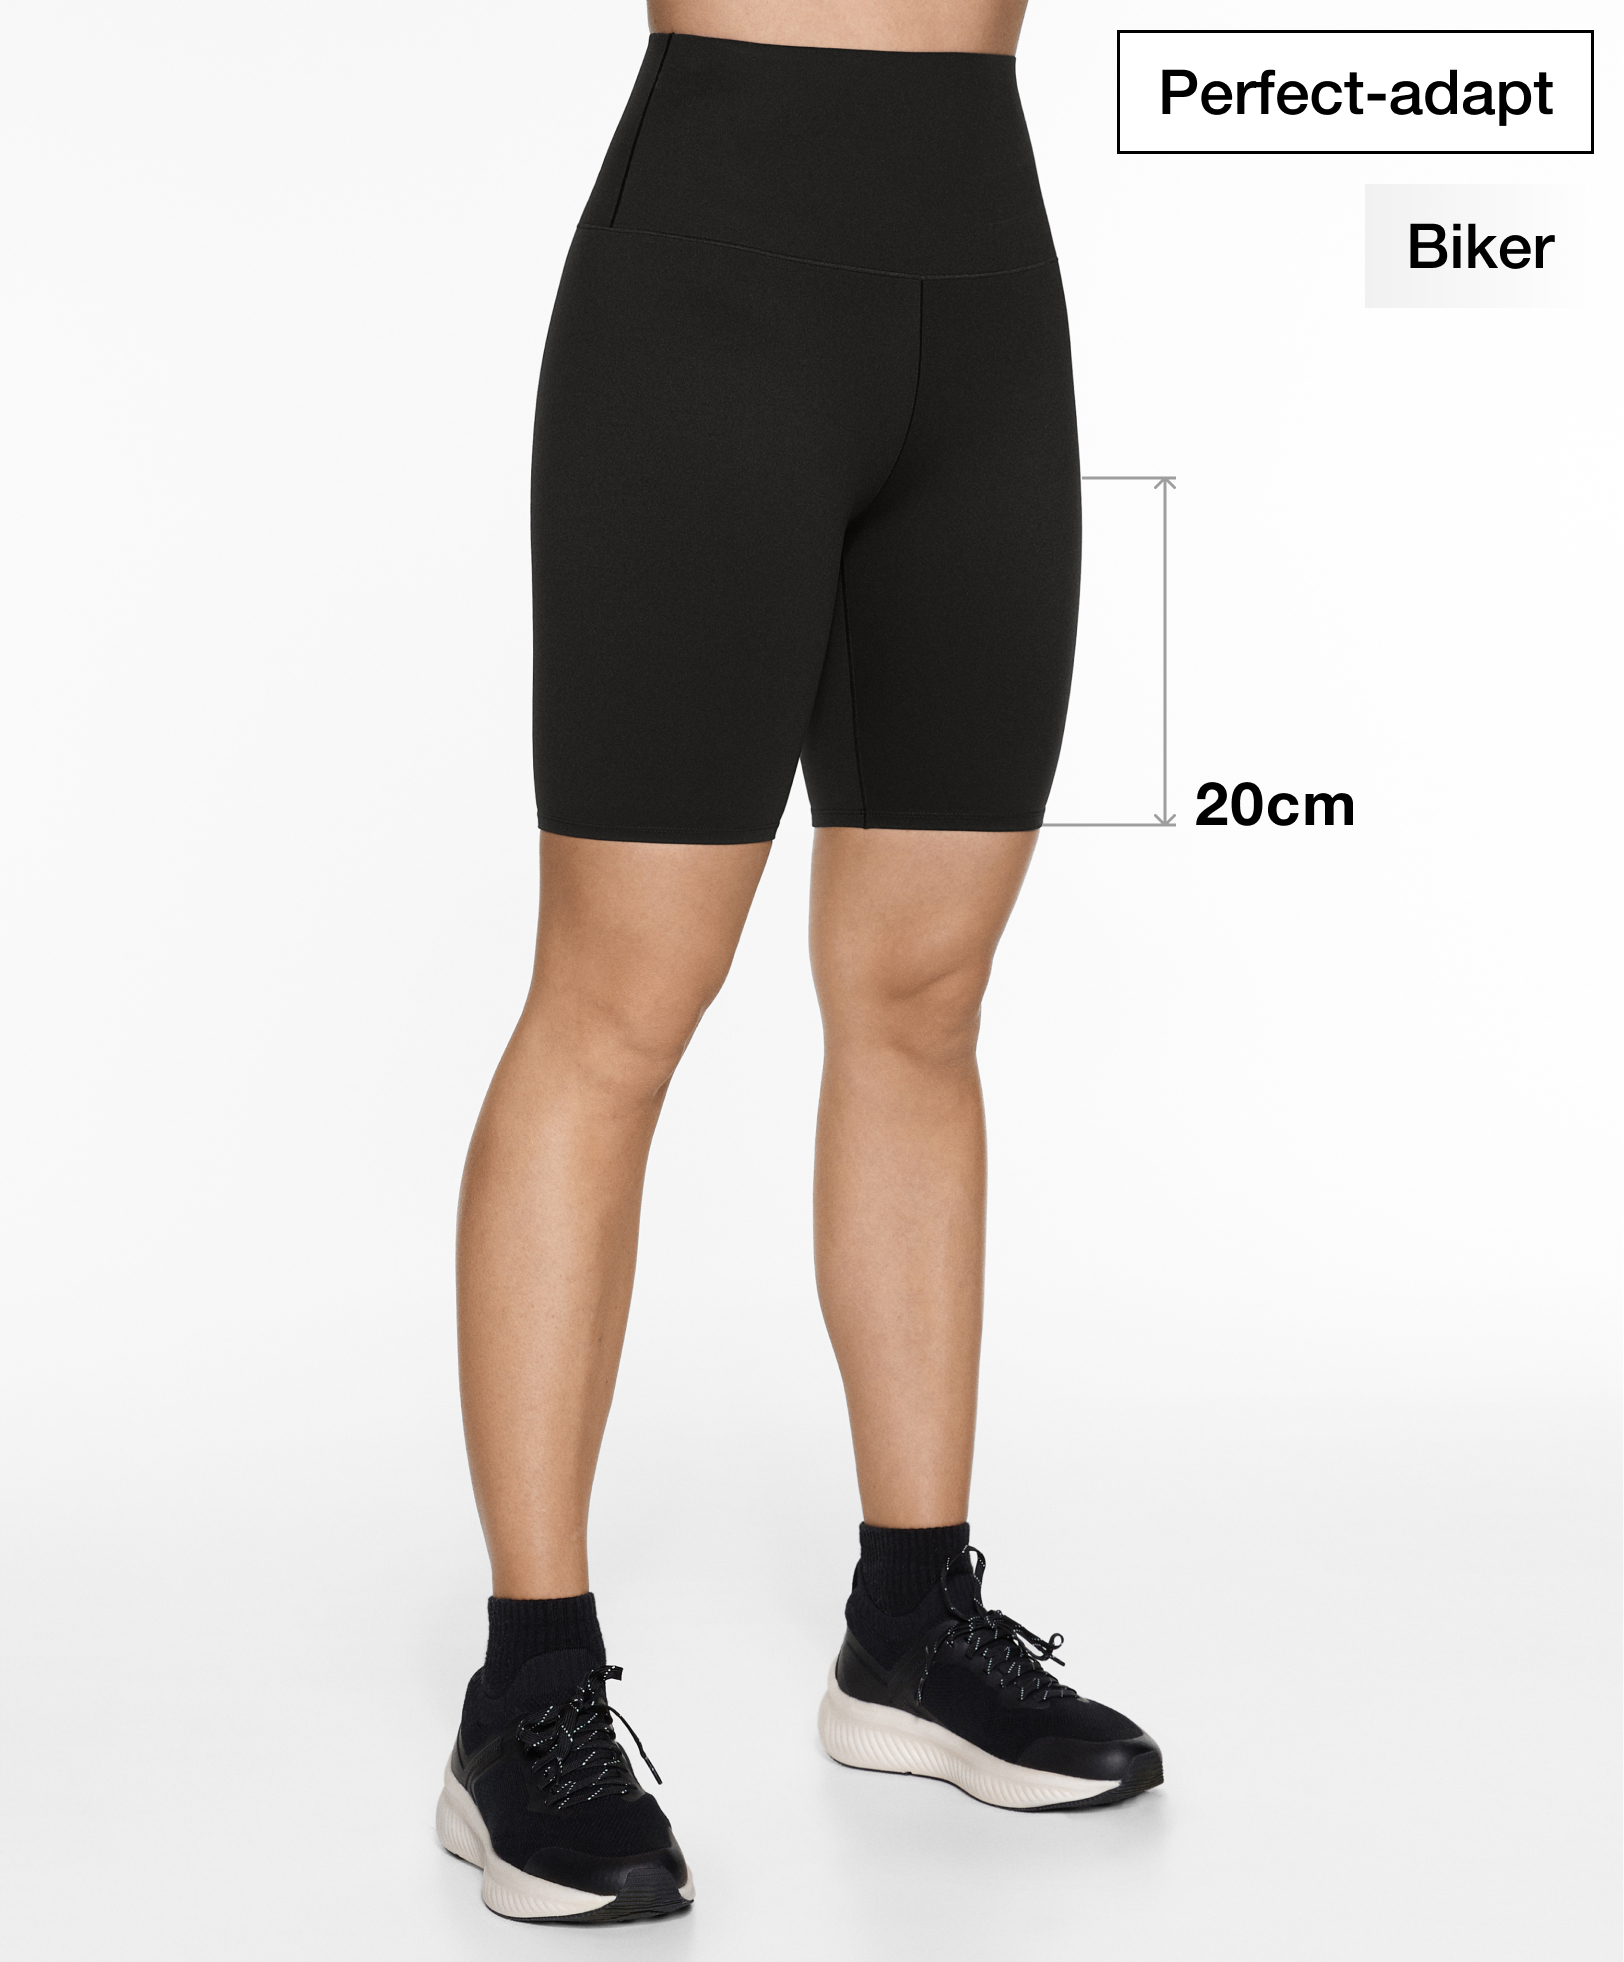 Perfect-adapt high-rise 20cm cycle shorts